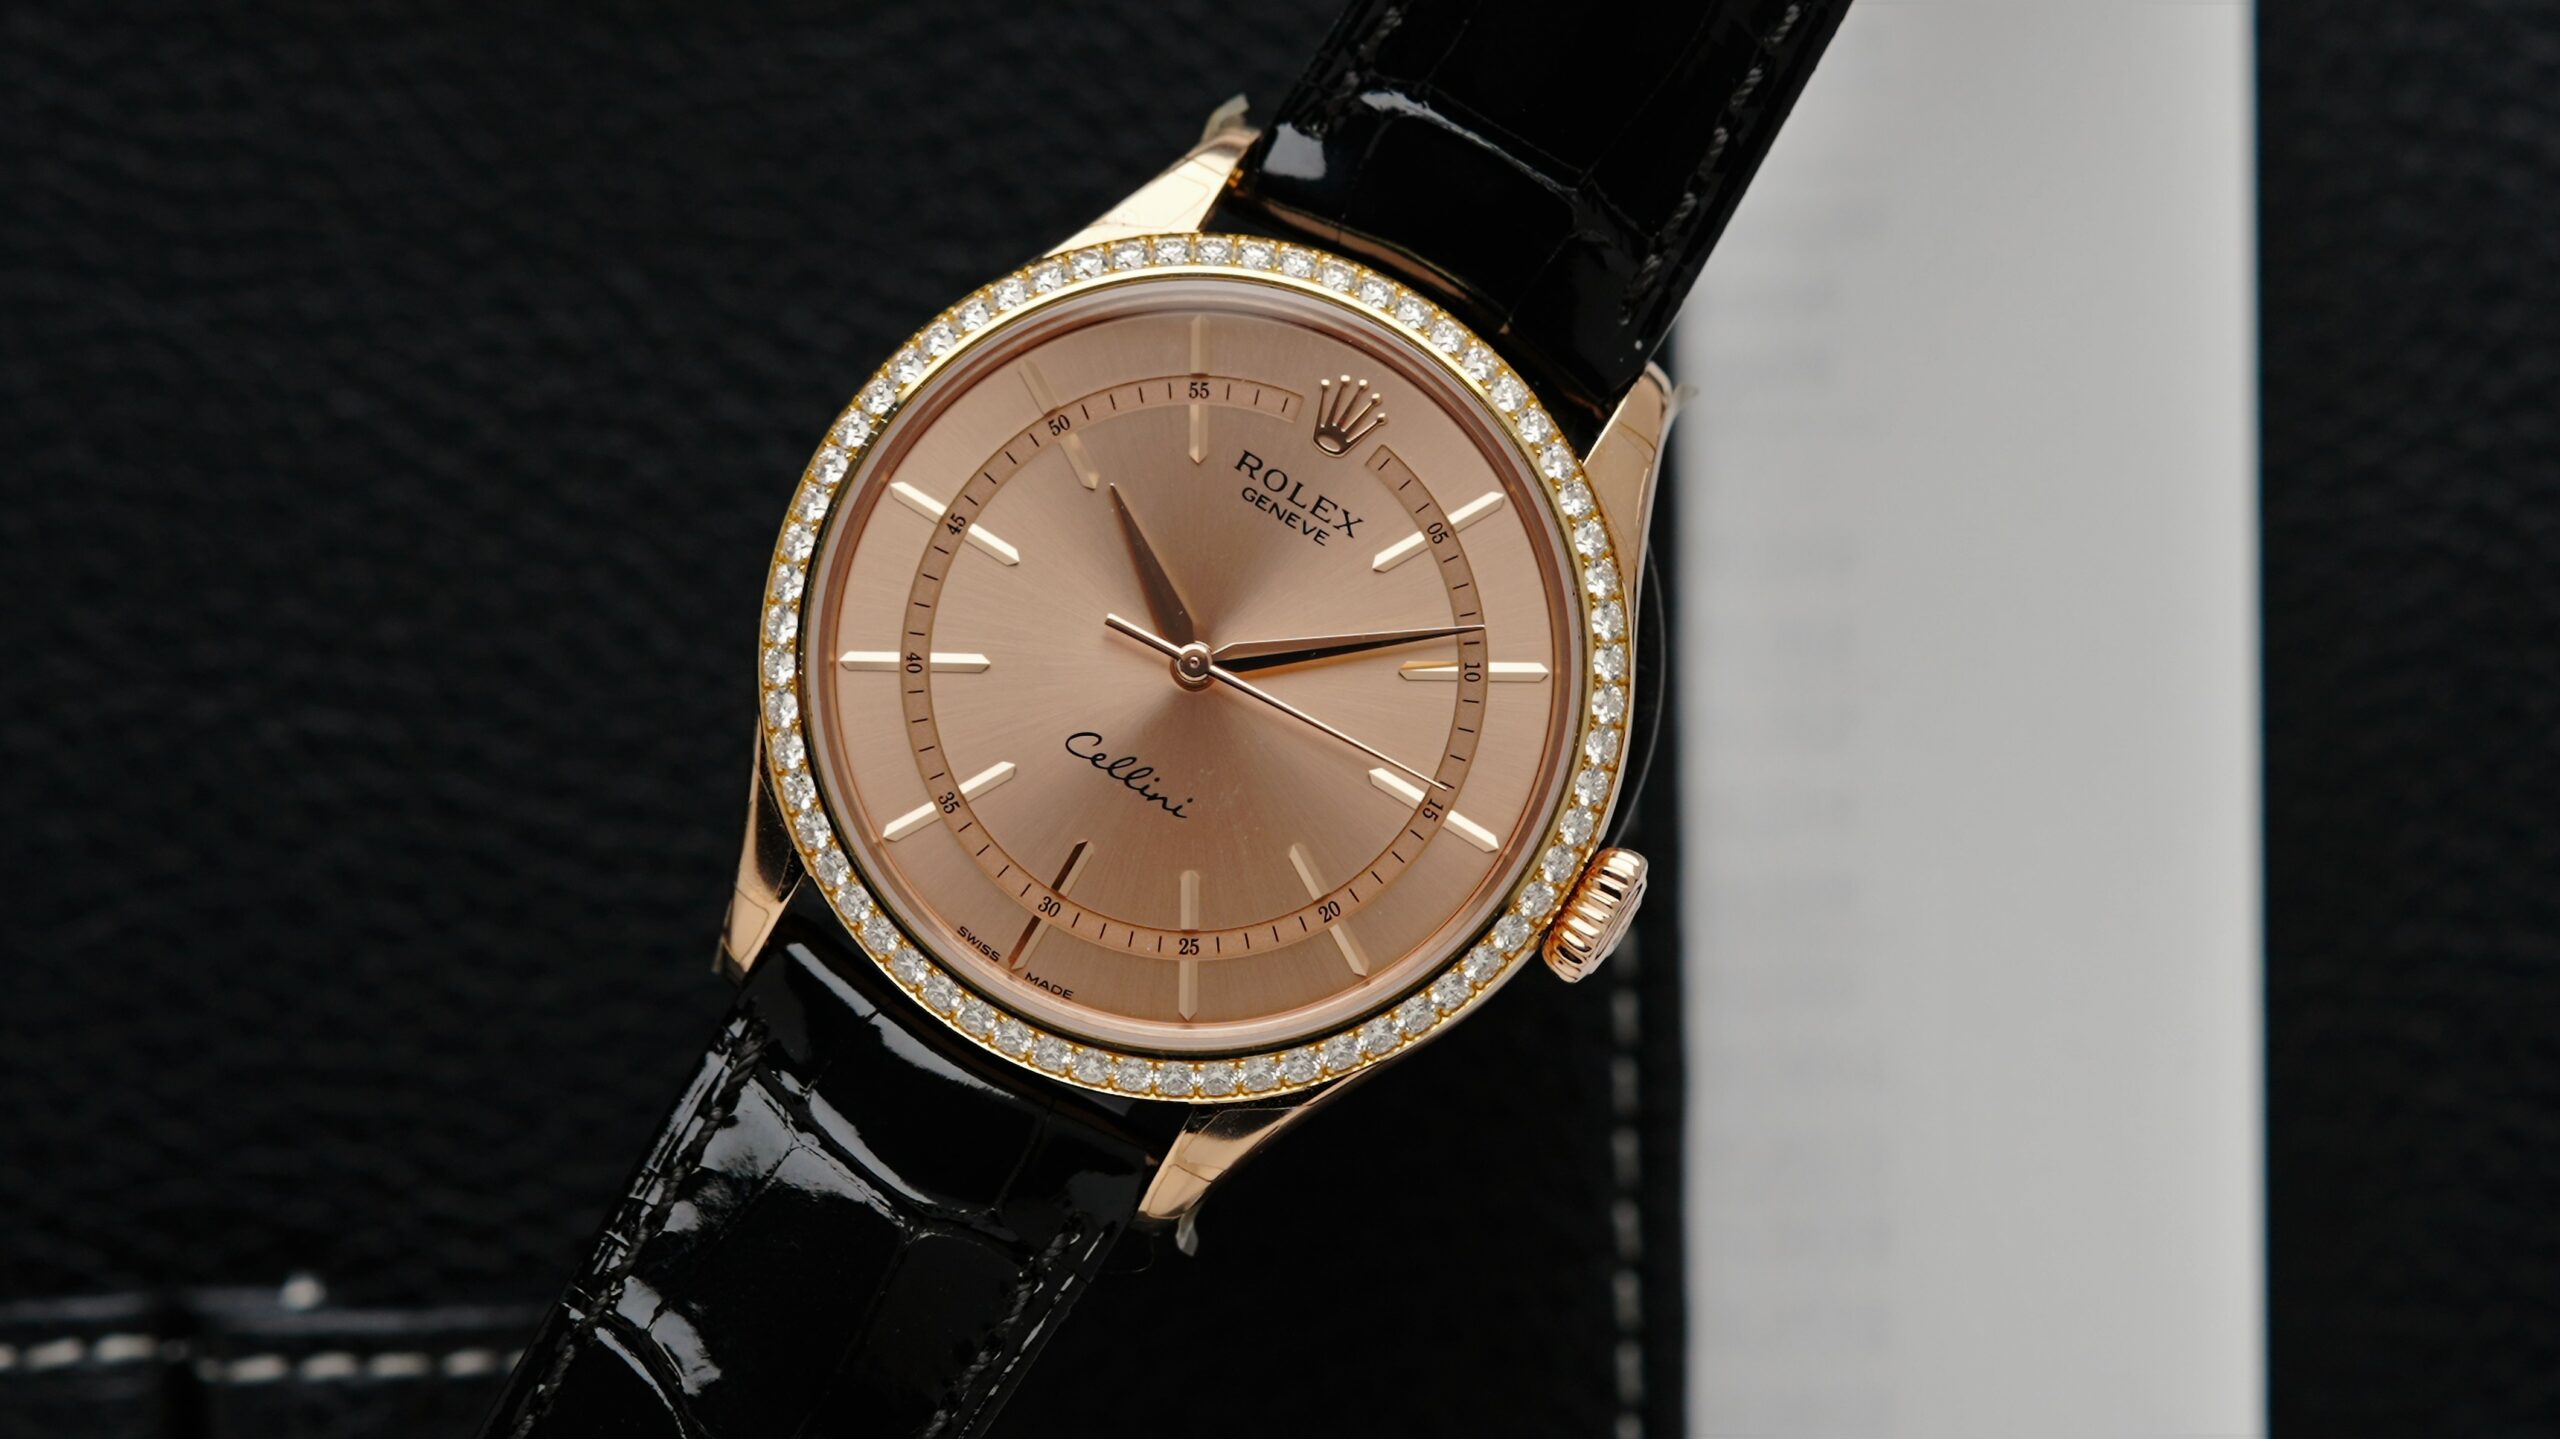 Rolex Cellini Time Salmon Rose Gold watch pictured on an angle under white light.